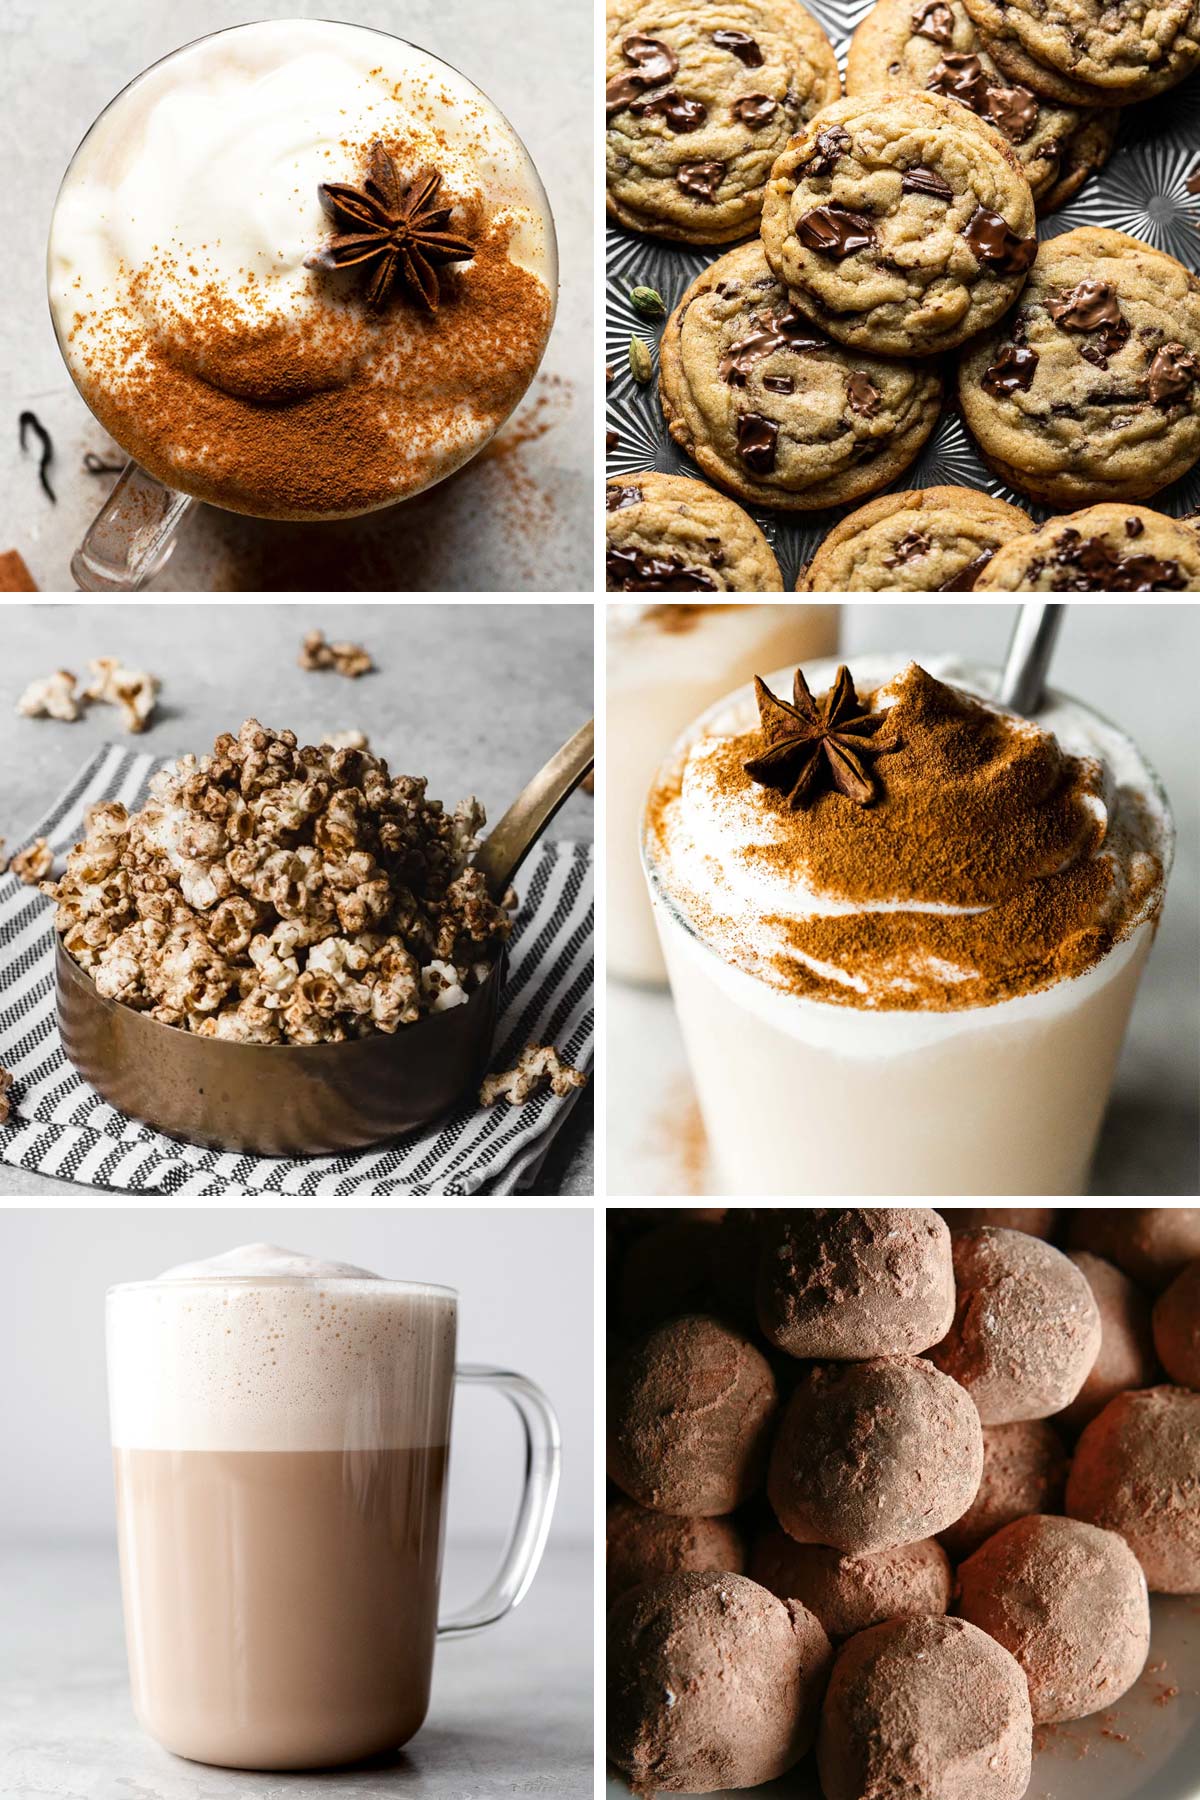 6 photos of drinks and food made with chai tea as an ingredient.